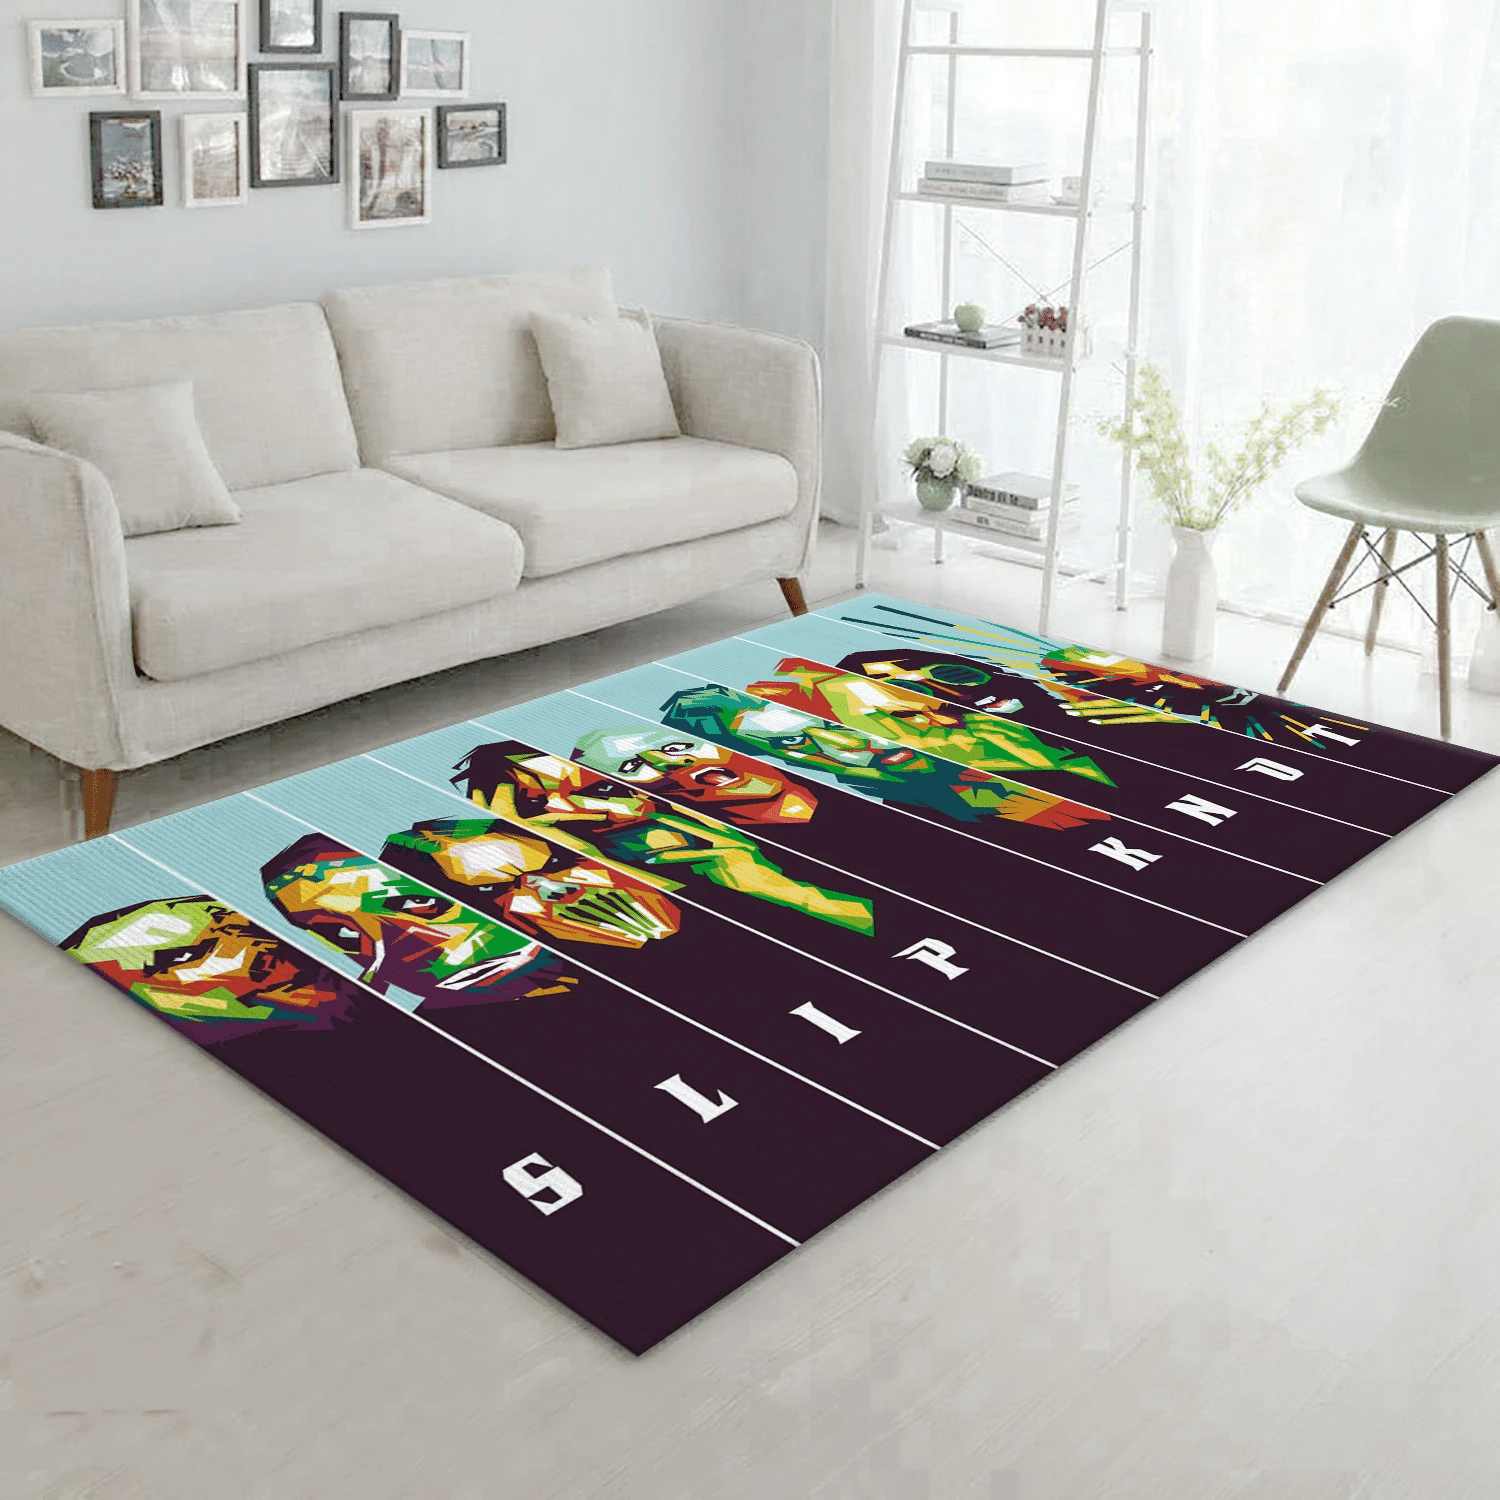 Slipknot Band Music Area Rug, Living Room  Rug - US Gift Decor - Indoor Outdoor Rugs 1